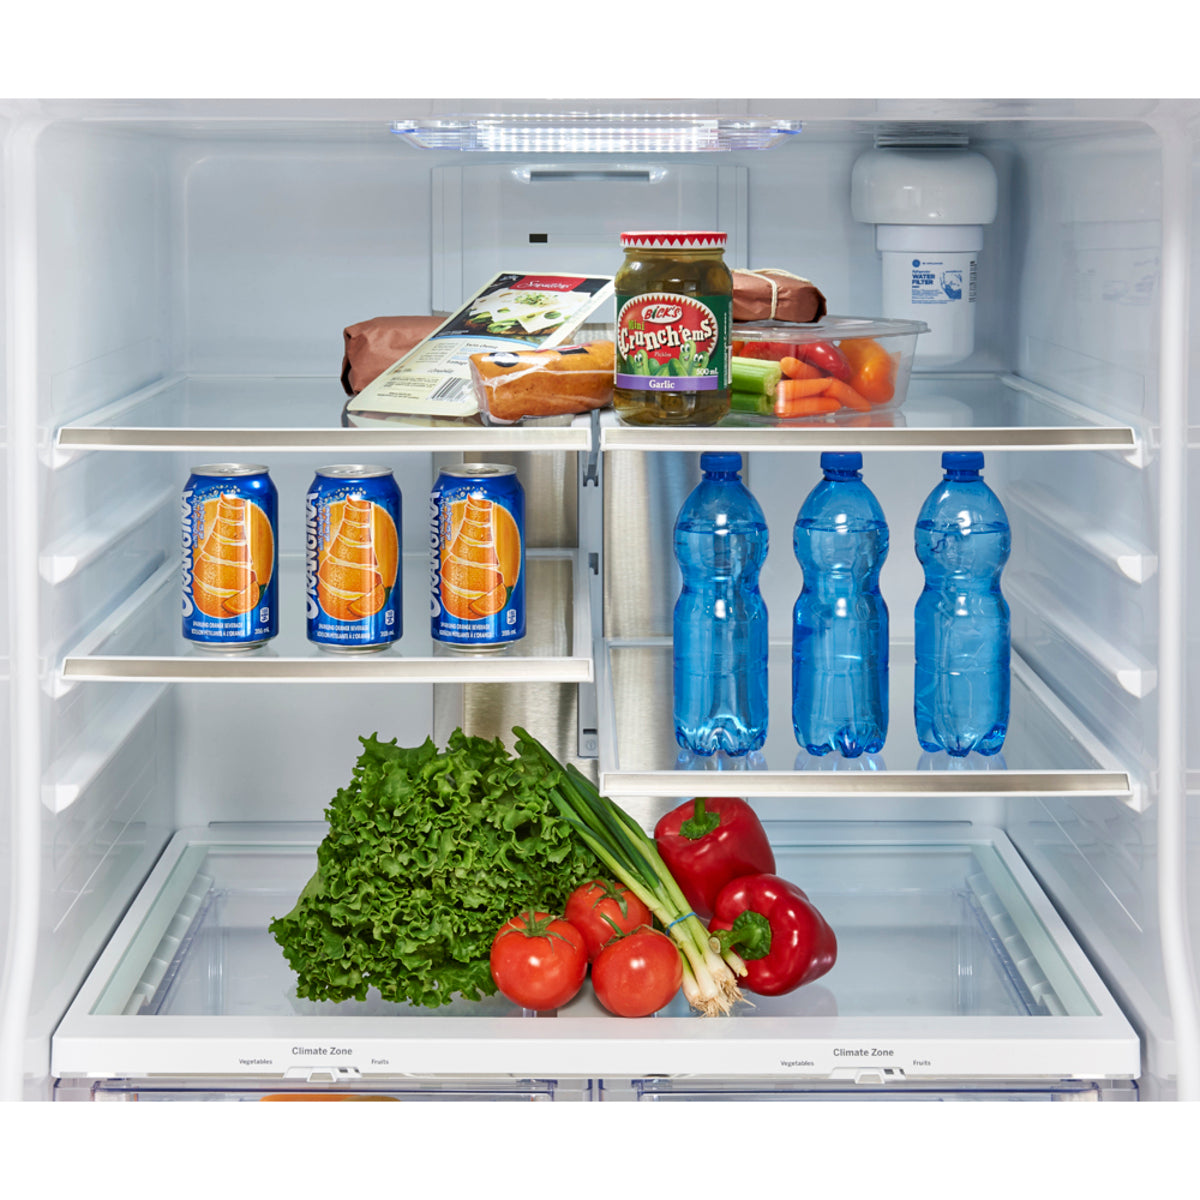 GE Profile - 29.75 Inch 20.8 cu. ft French Door Refrigerator in Stainless - PNE21NYRKFS